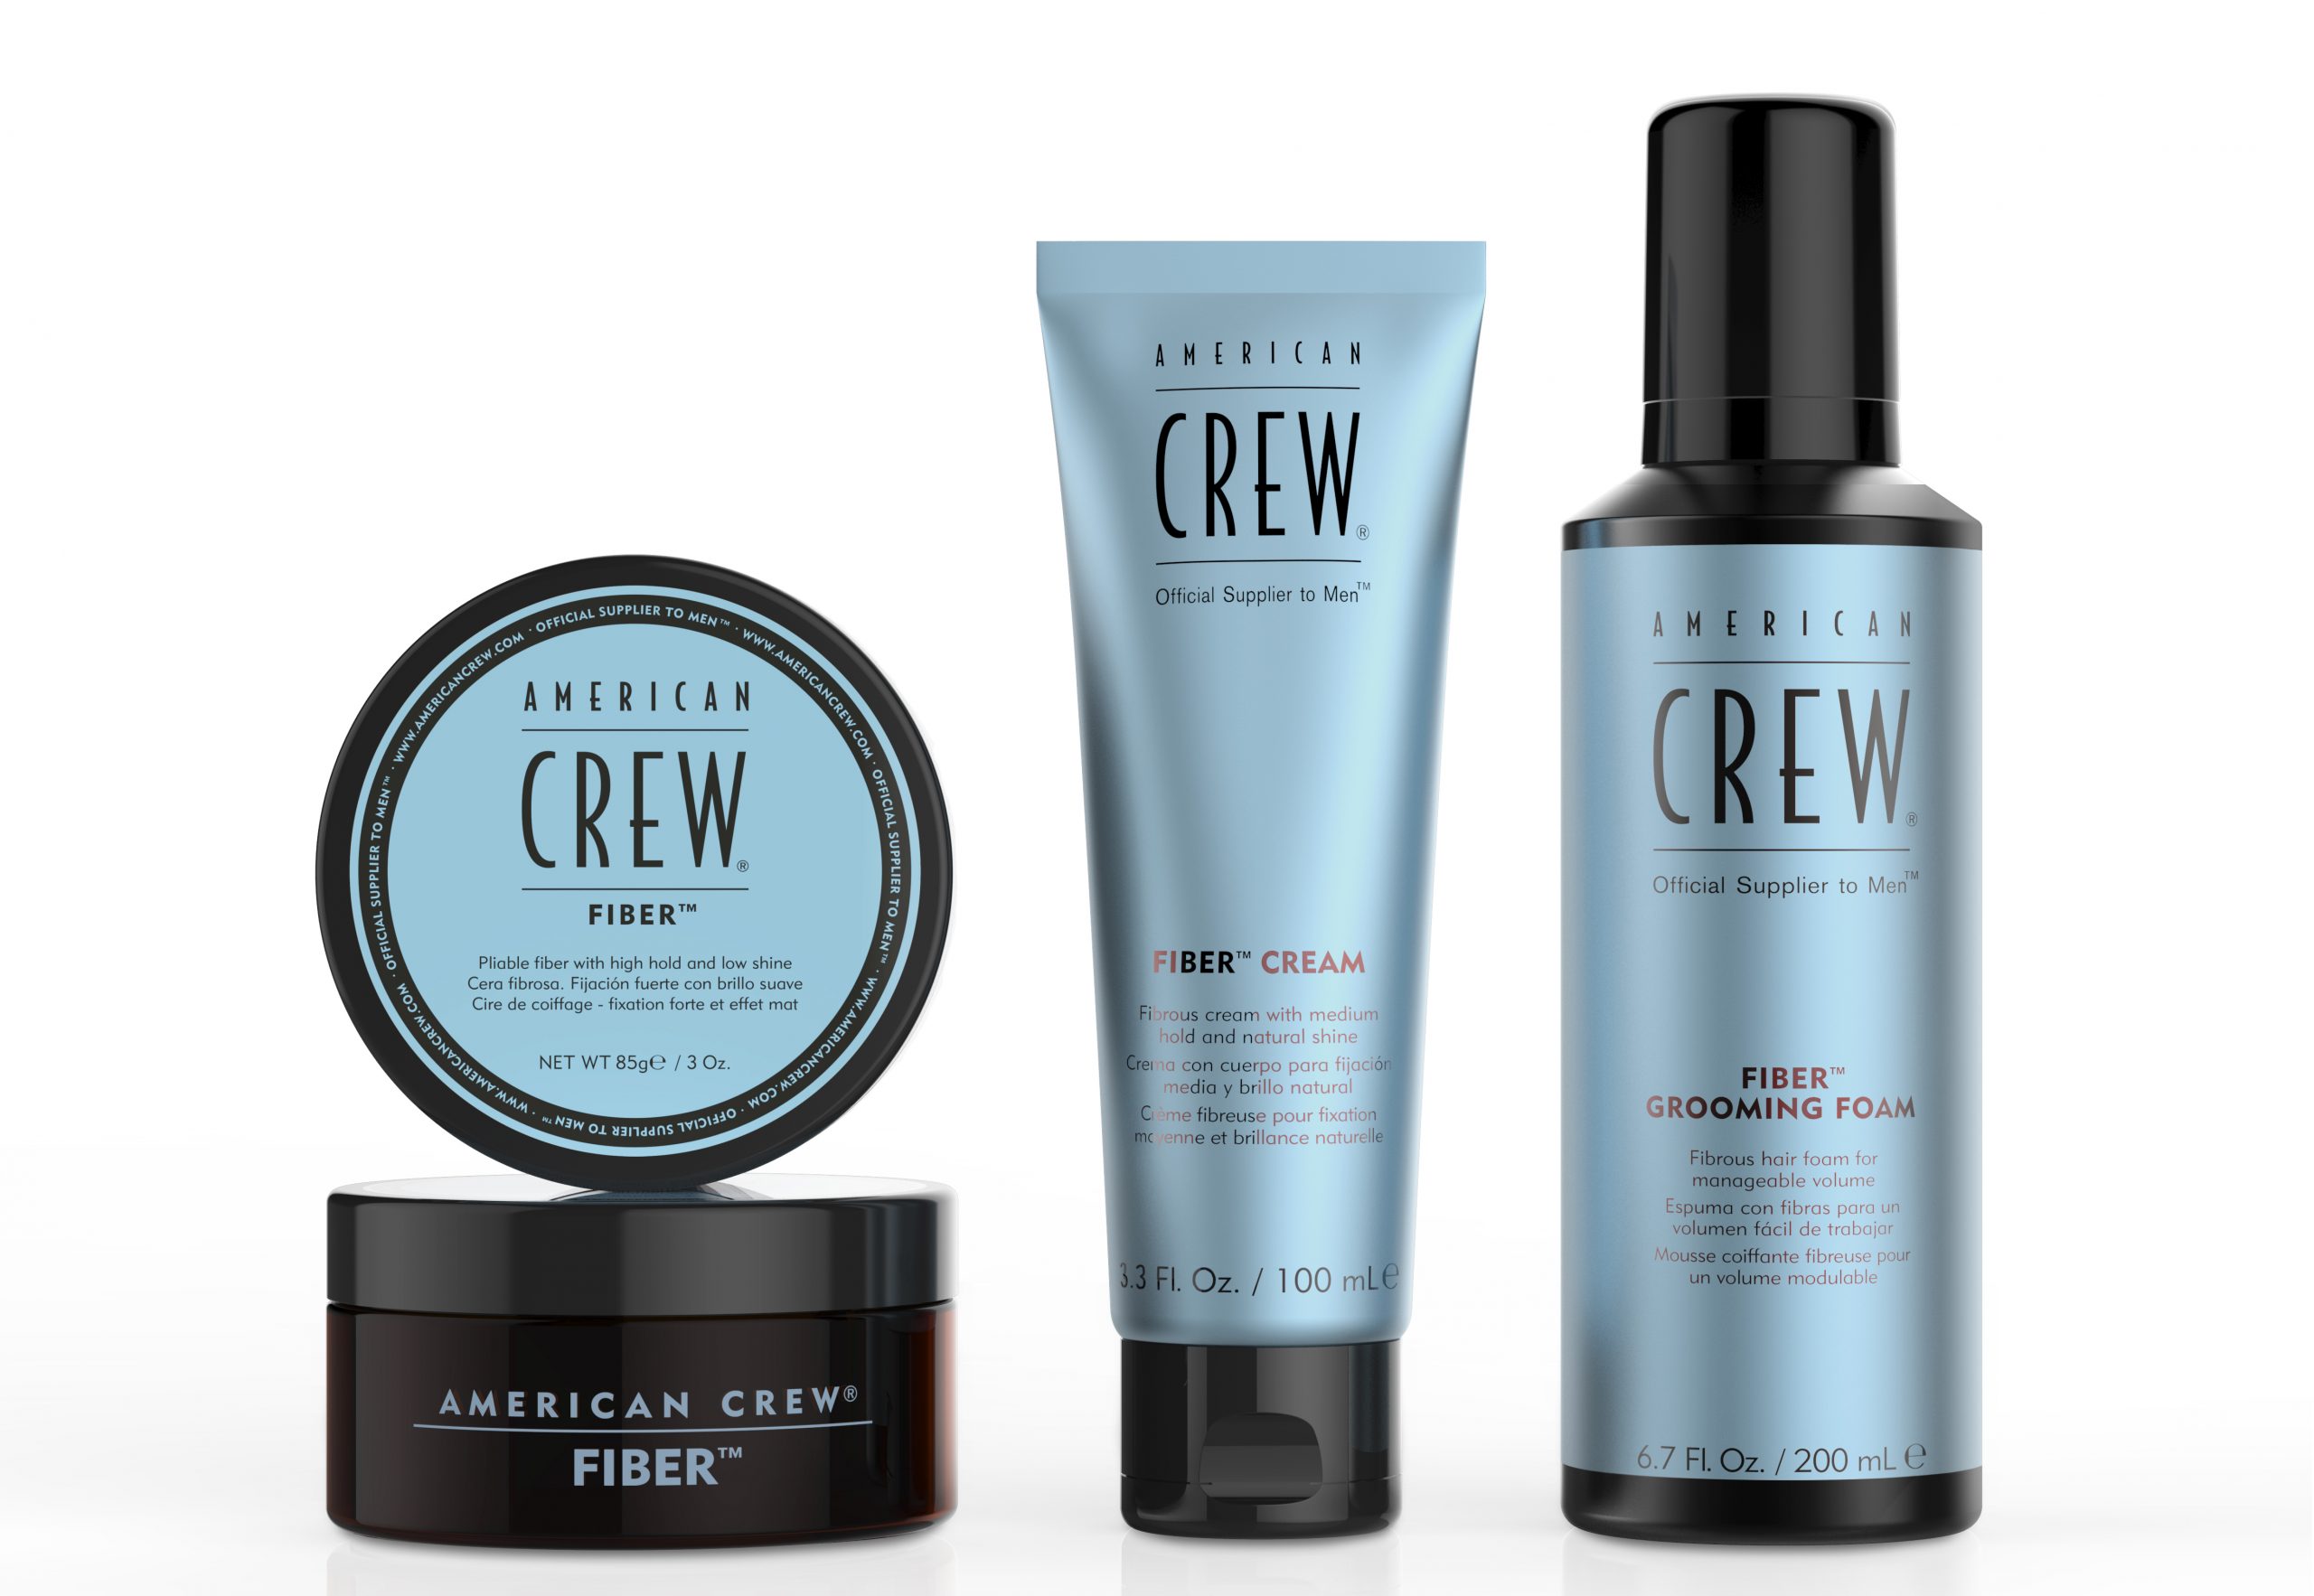 Top Hair Care Products - Hair Care & Grooming - American Crew